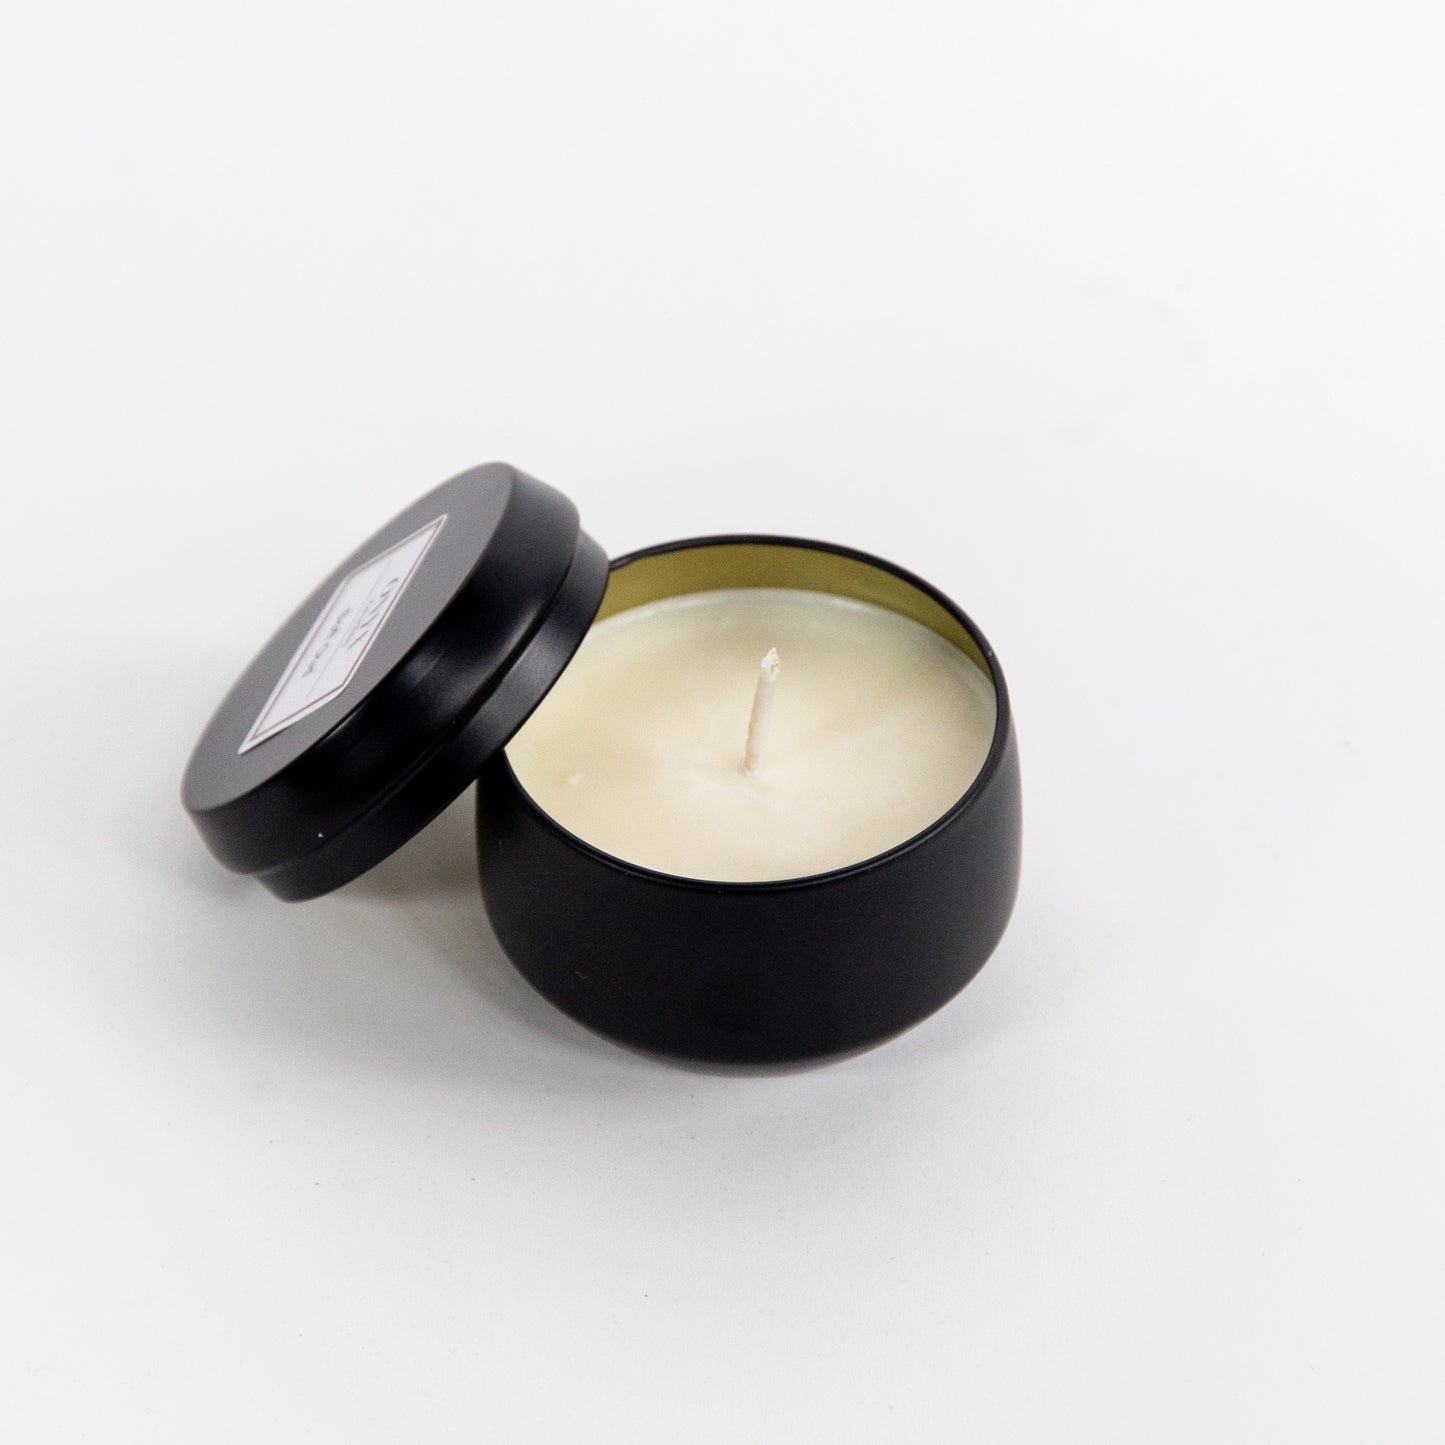 4 oz matte black tin option for the Self Care scented candle